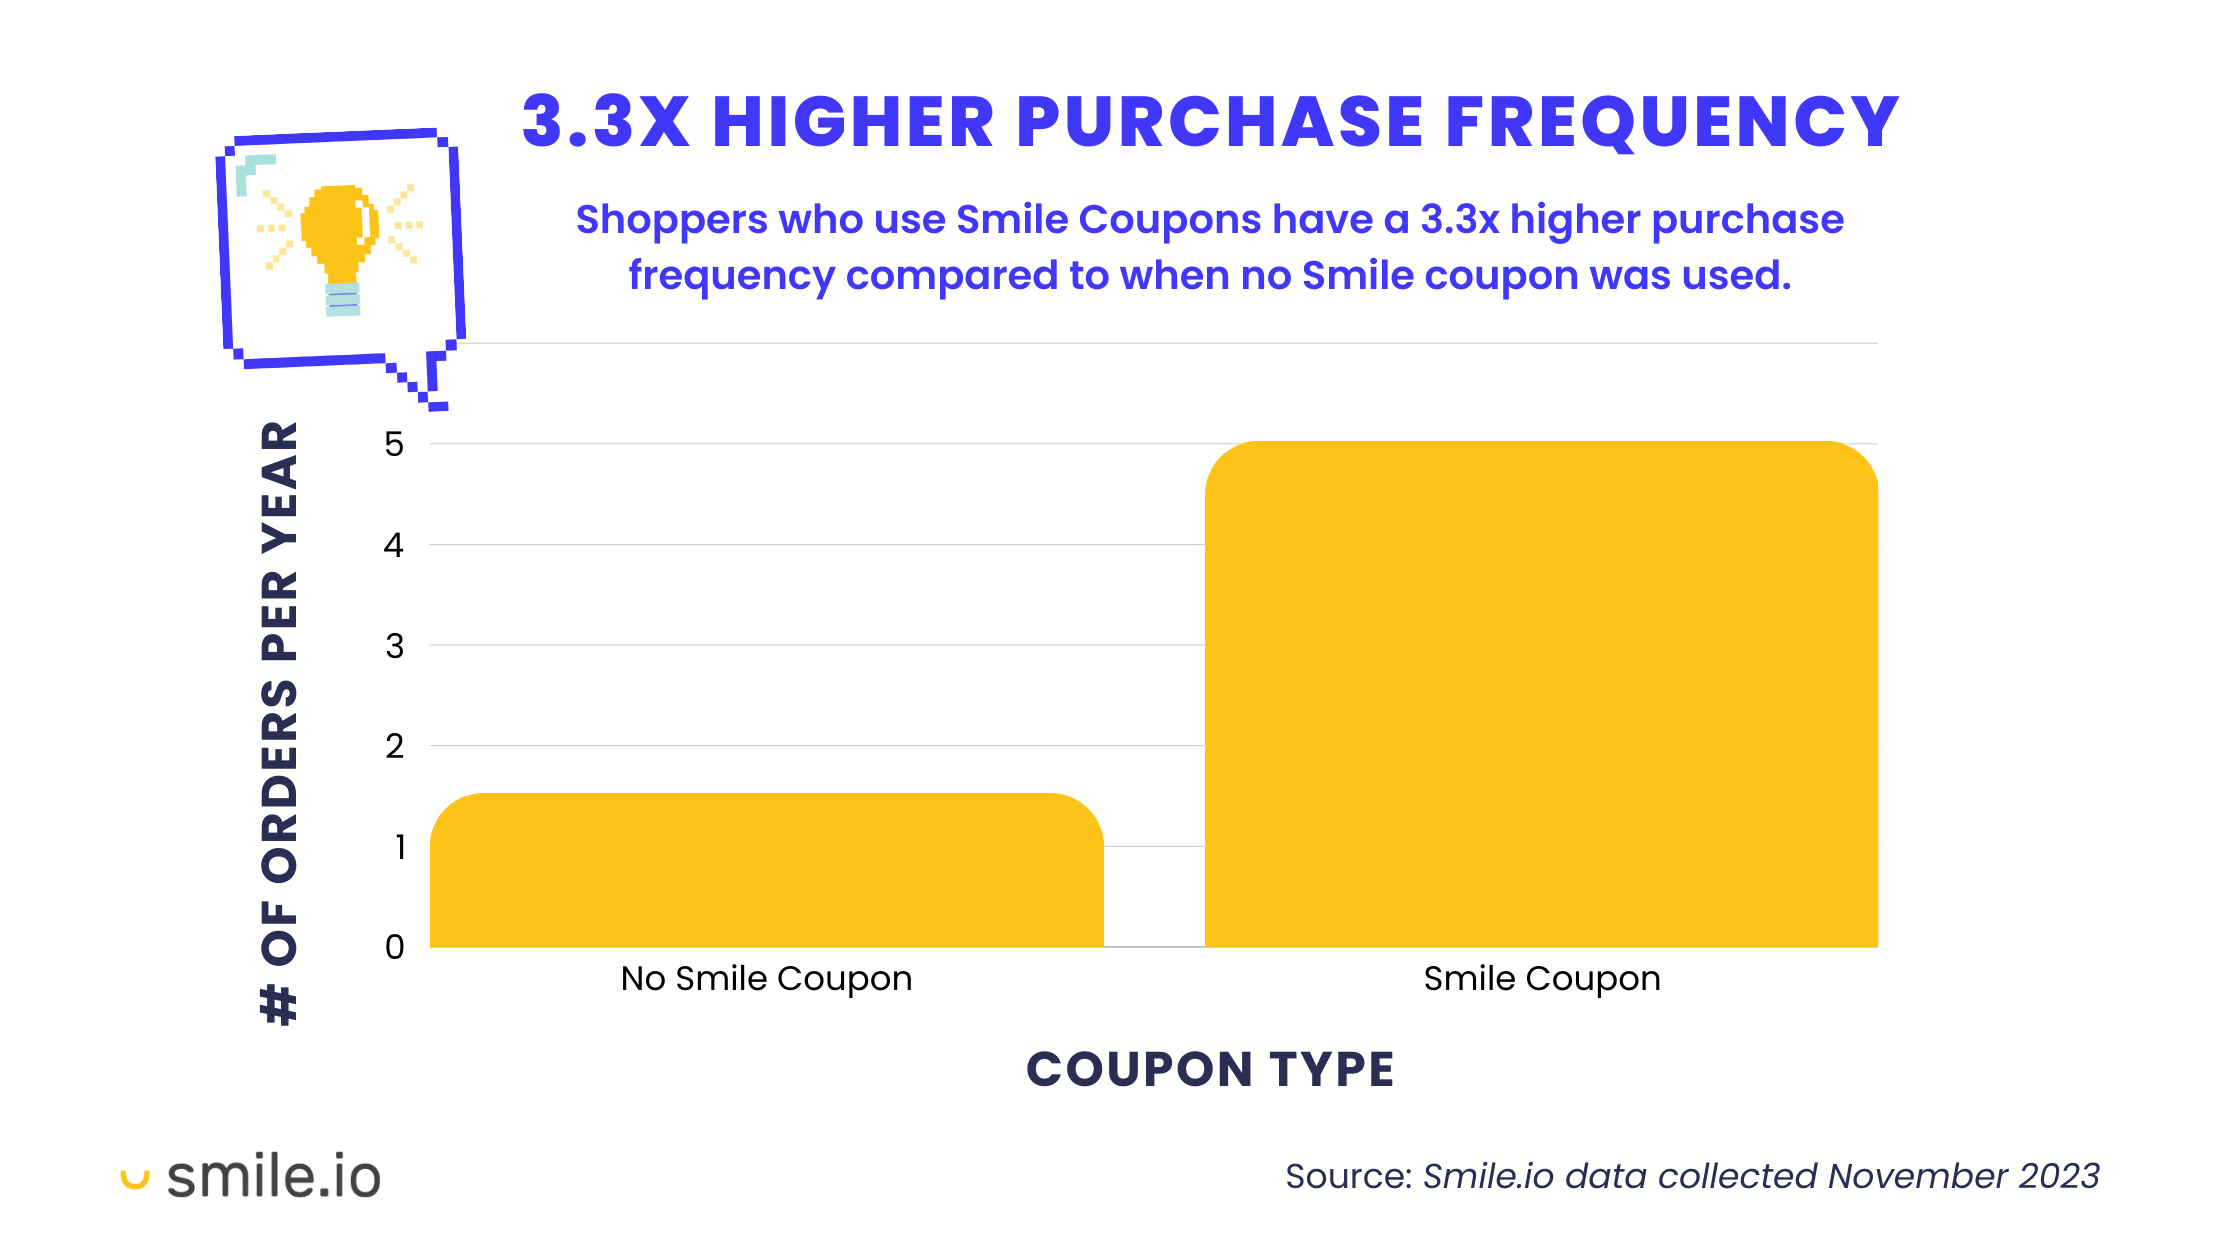 A bar chart showing how coupon type affects the number of orders per year or purchase frequency. It has 2 bars representing shoppers with no smile coupons and those with a Smile coupon. The Smile coupon bar is 3.3x higher than the no Smile coupon bar. 